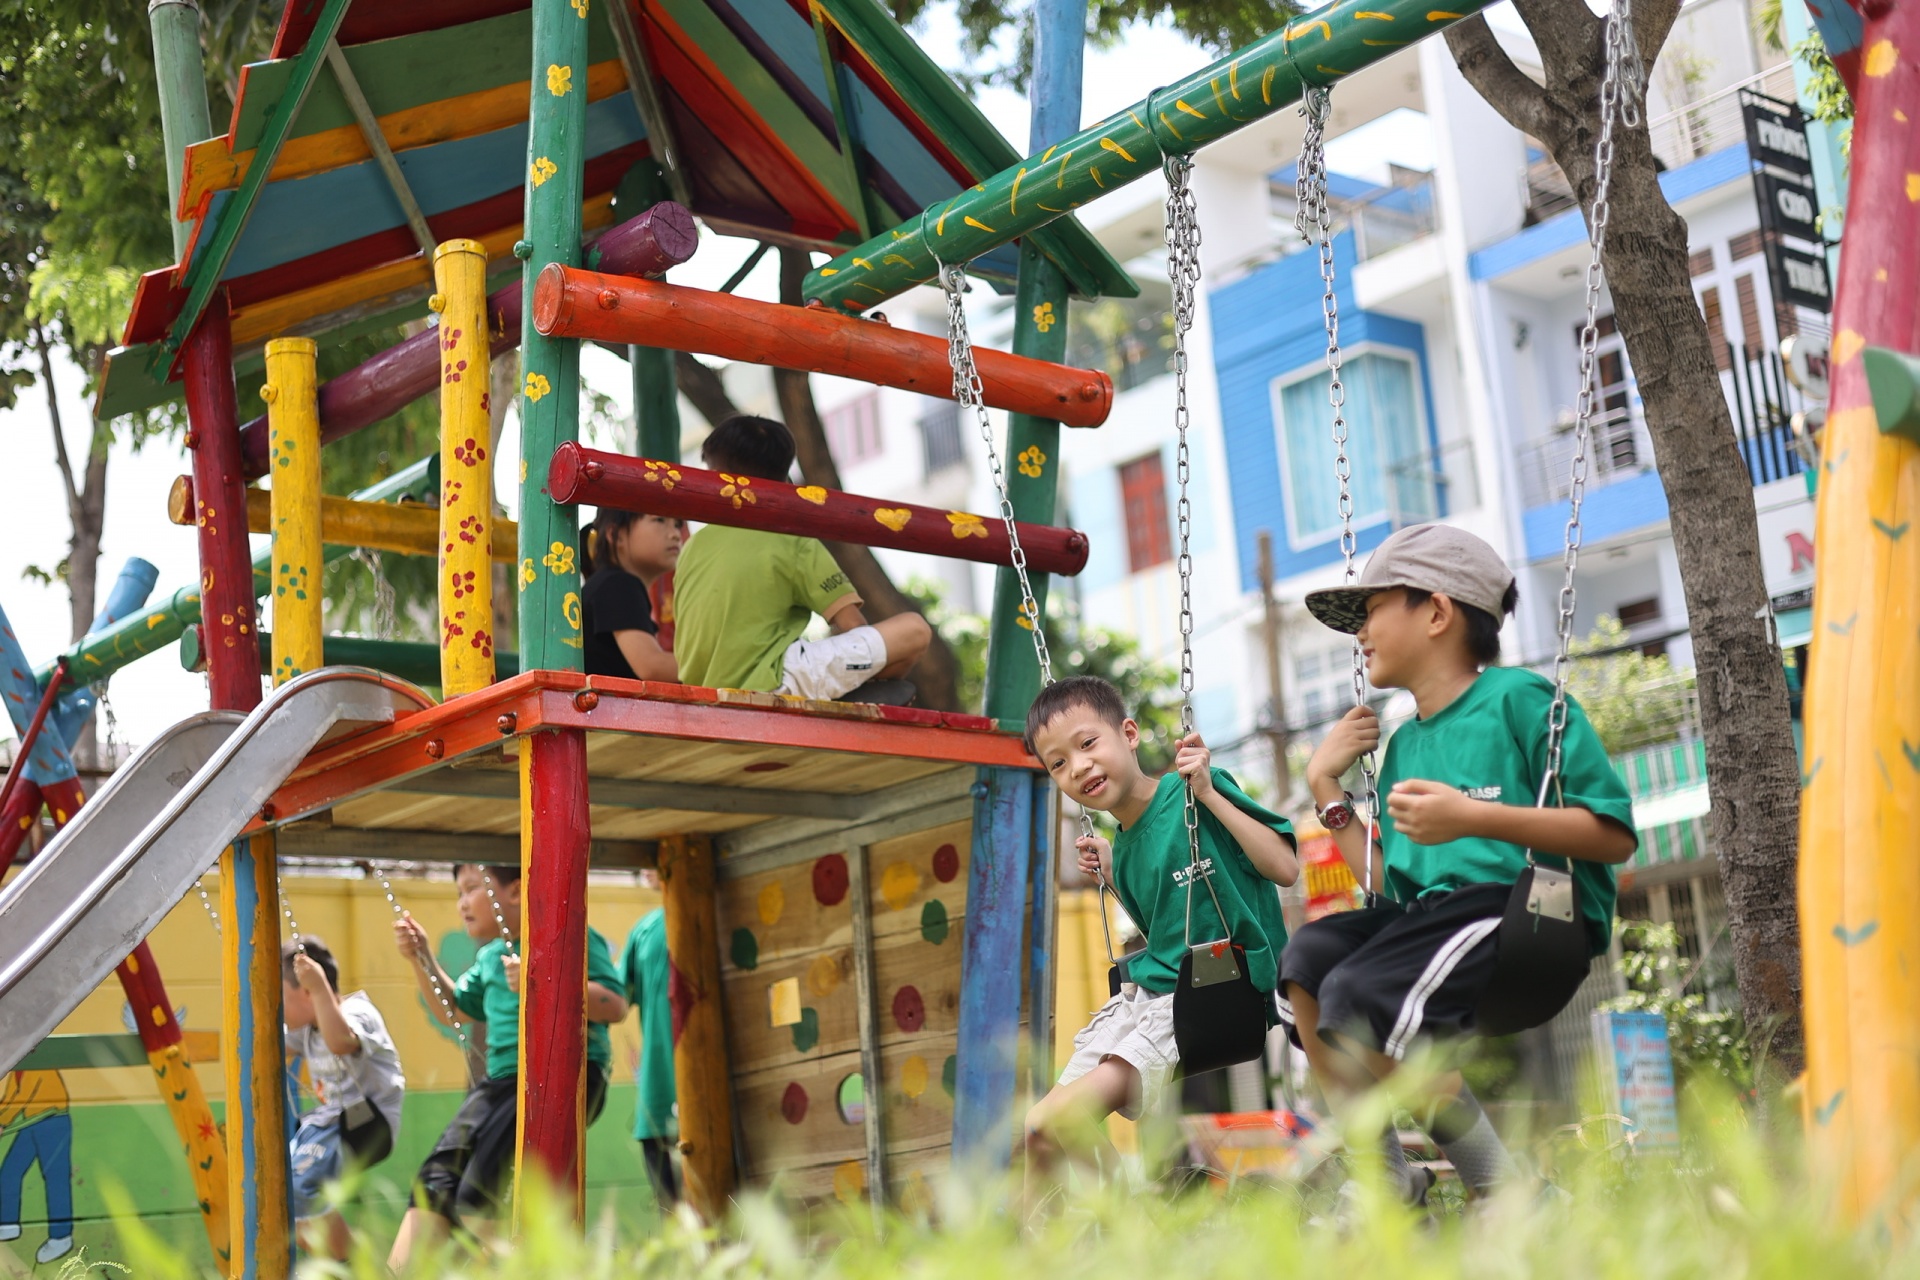 BASF Vietnam and Think Playgrounds launch seventh public playground in Ho Chi Minh City